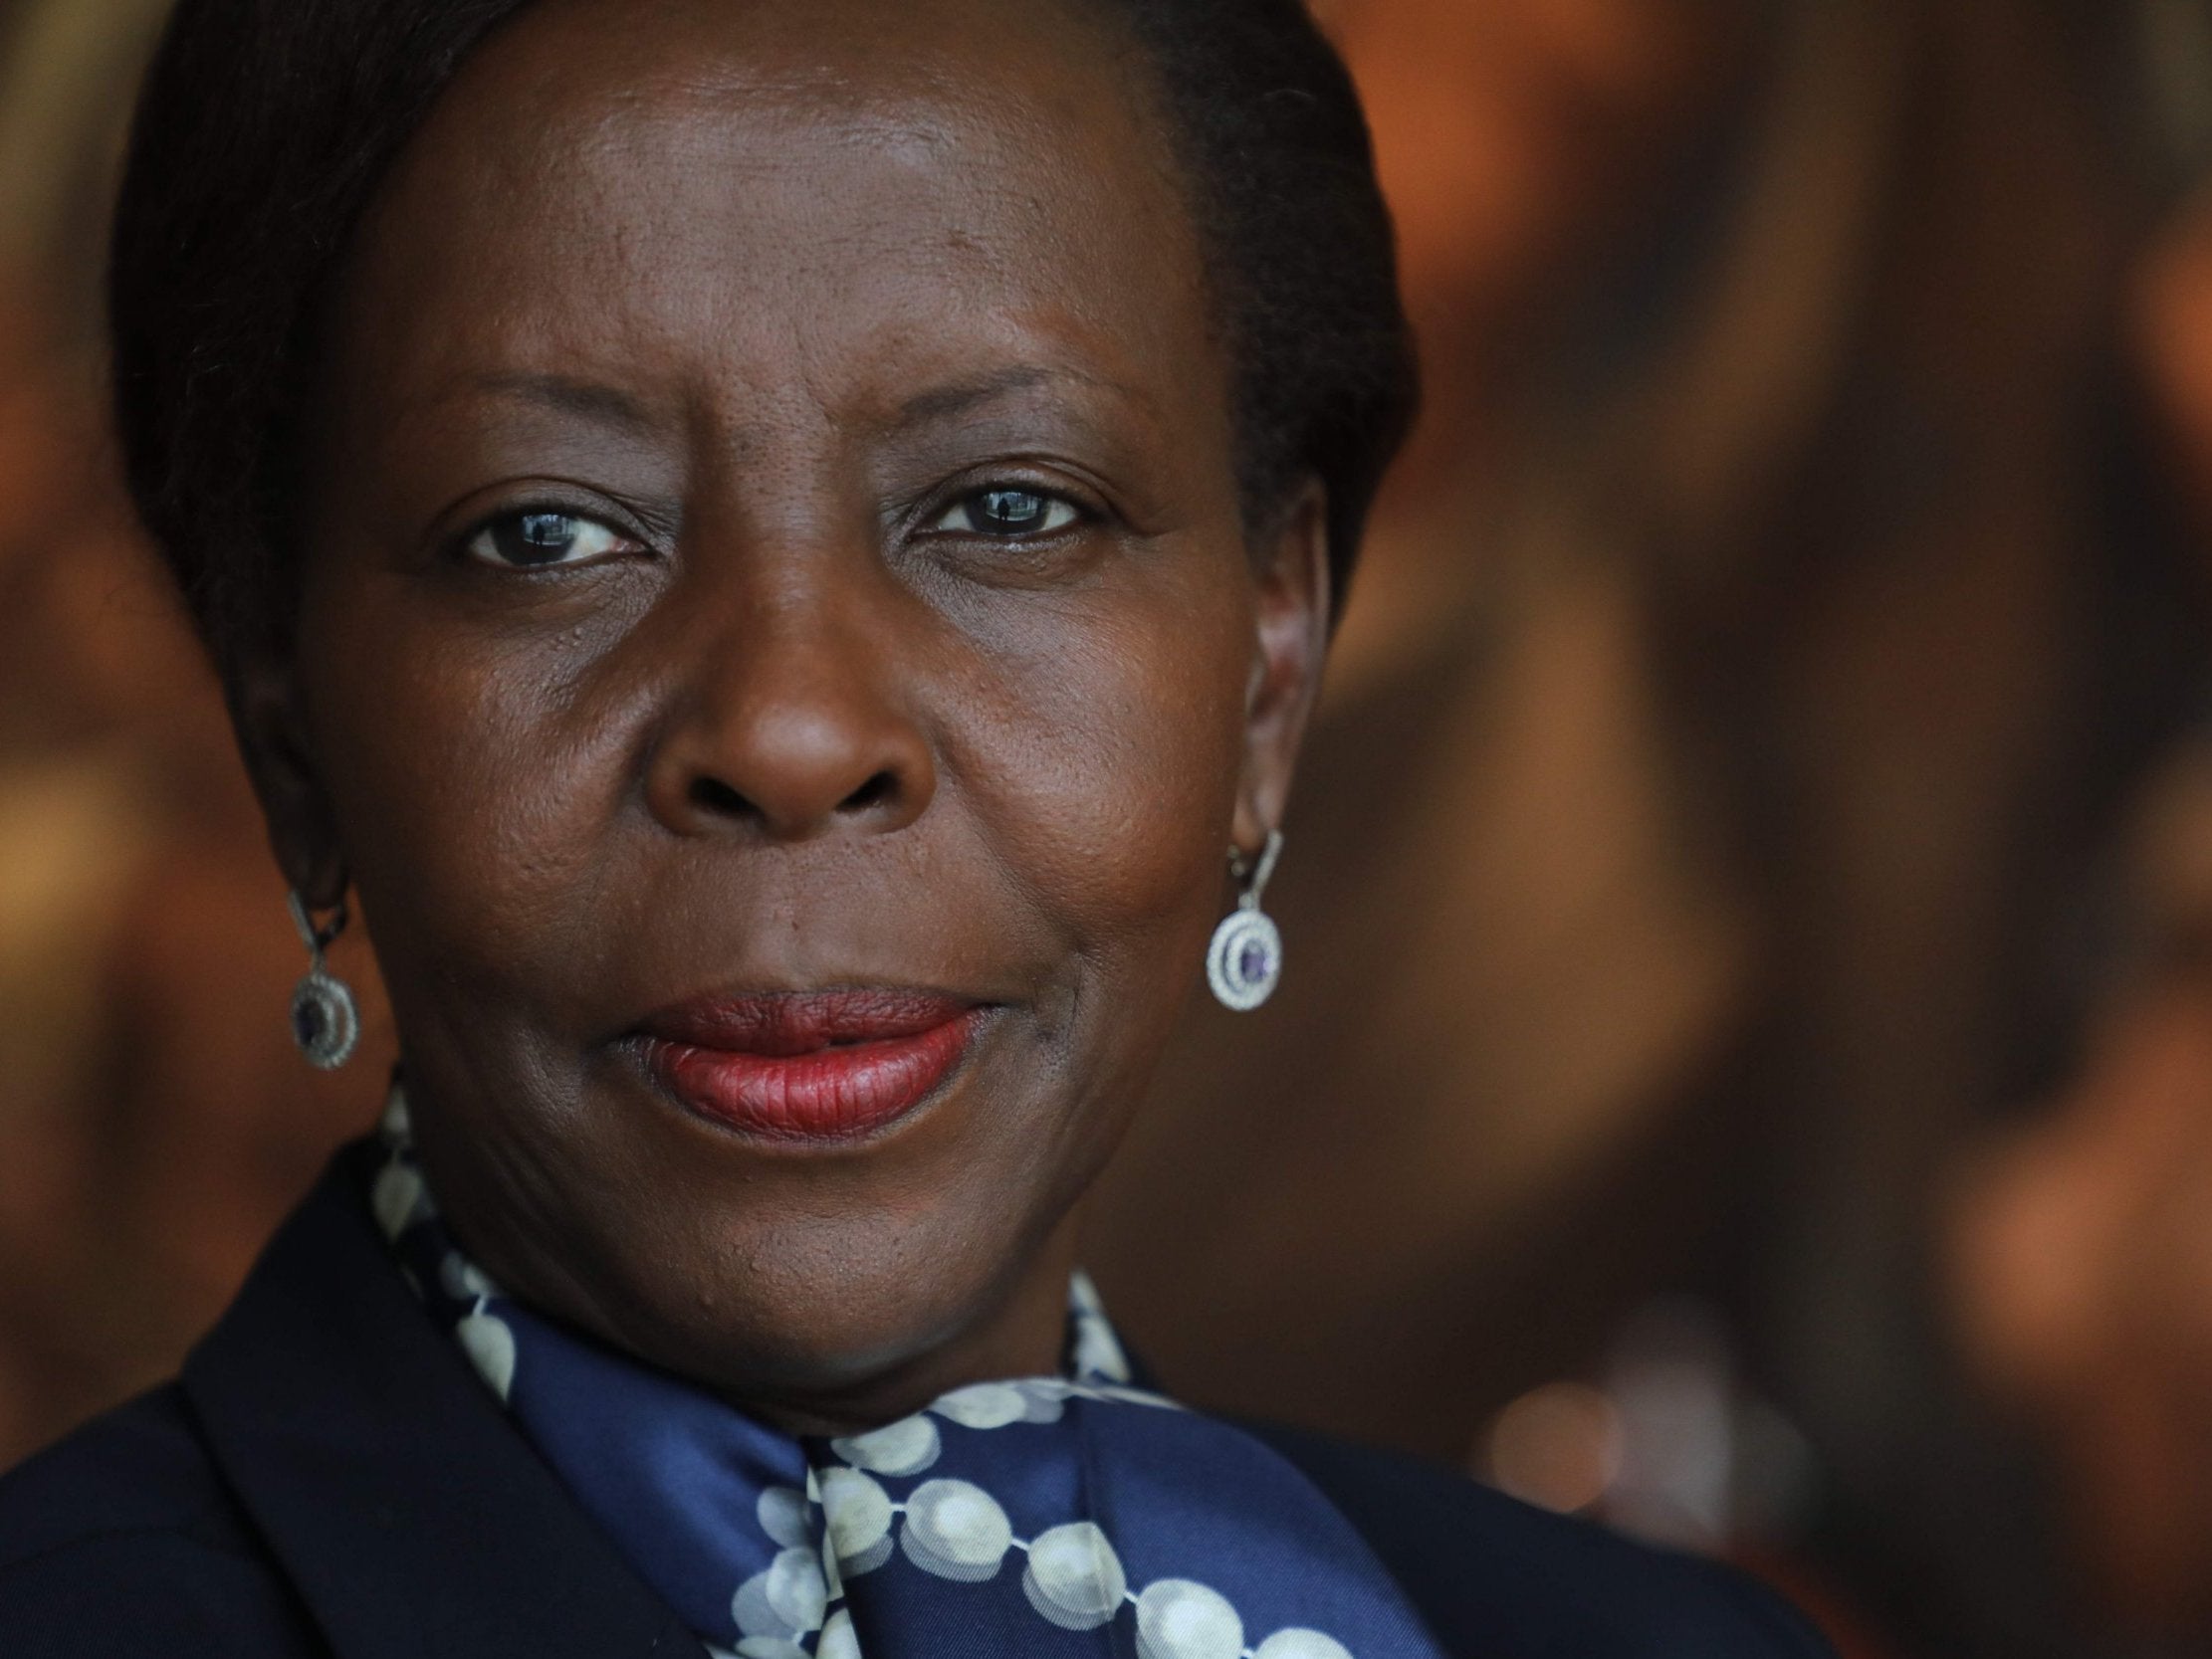 Rwanda Foreign Affairs Minister, Louise Mushikiwabo is the newly appointed head of the International Organisation of la Francophonie (OFI) (Photo by Ludovic MARIN / AFP)LUDOVIC MARIN/AFP/Getty Images